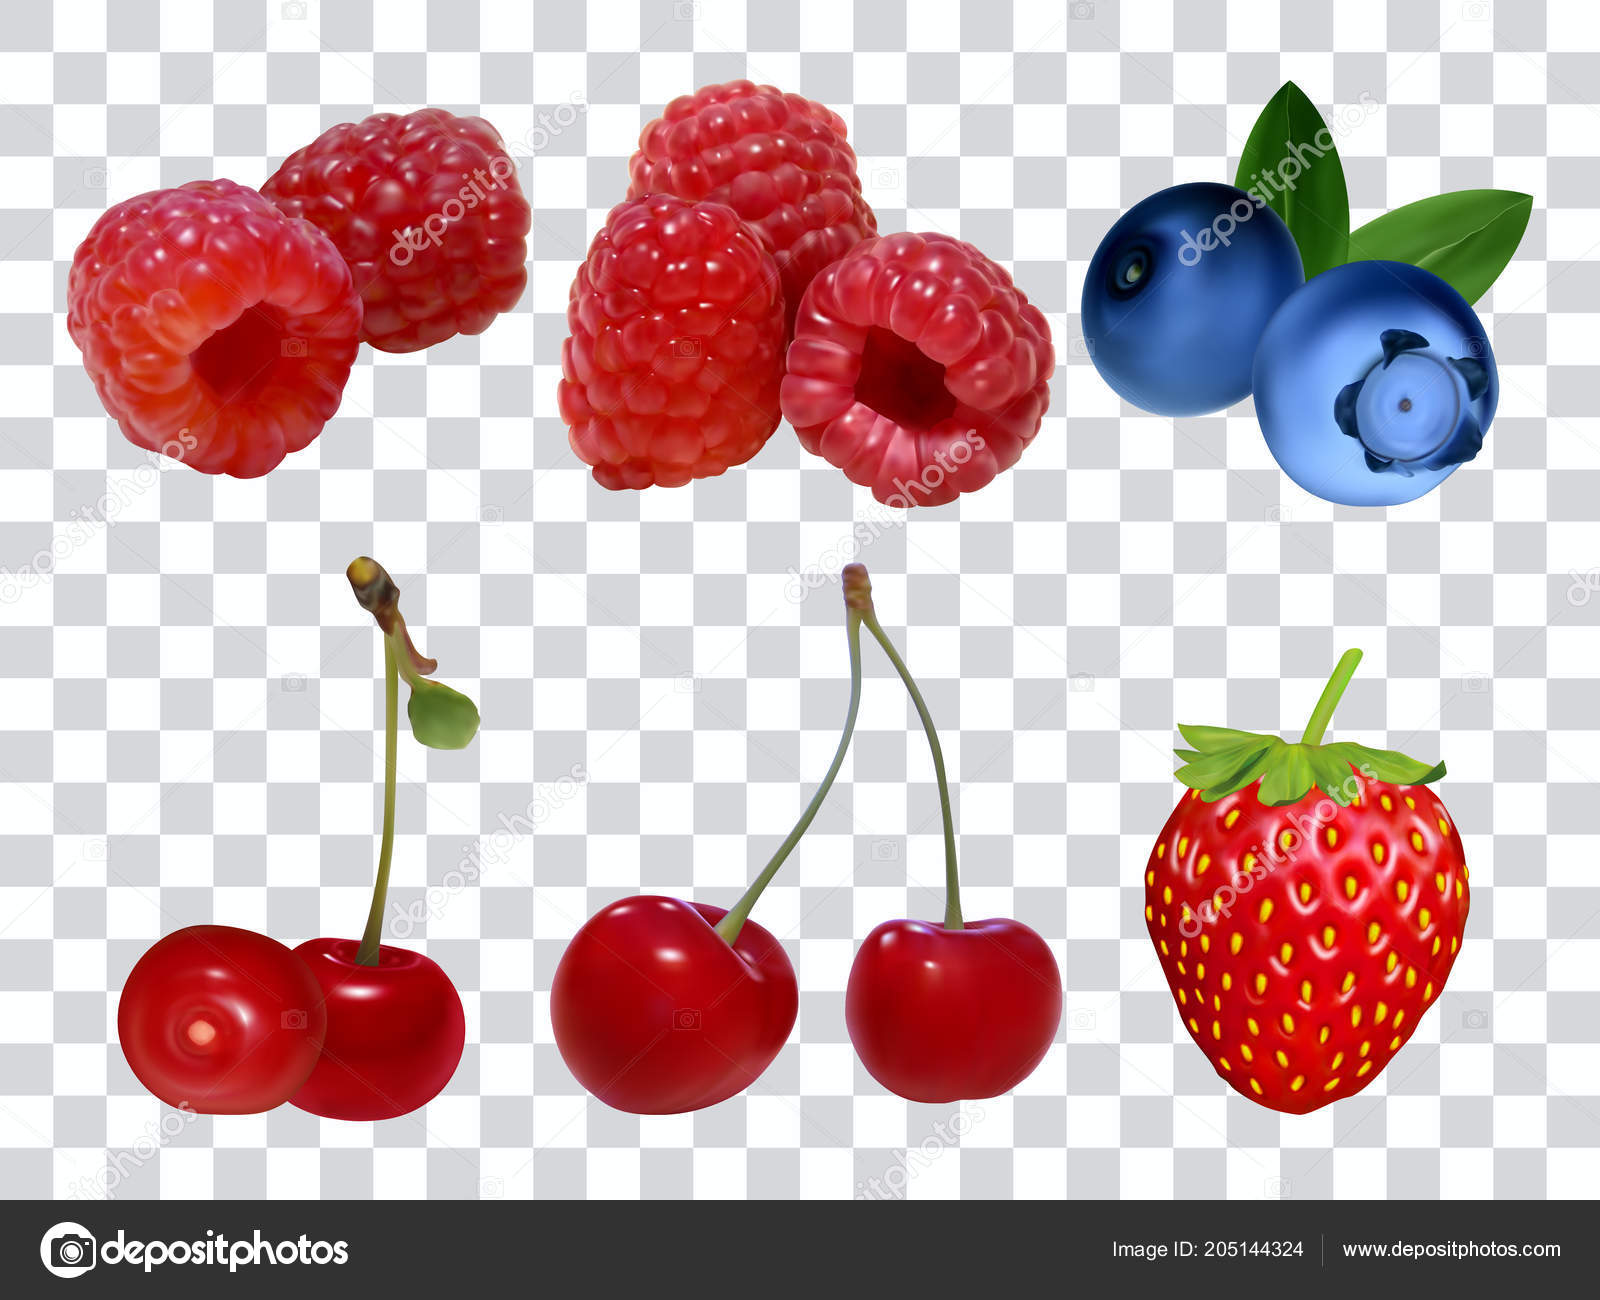 Set of different berries on a white background Vector Image